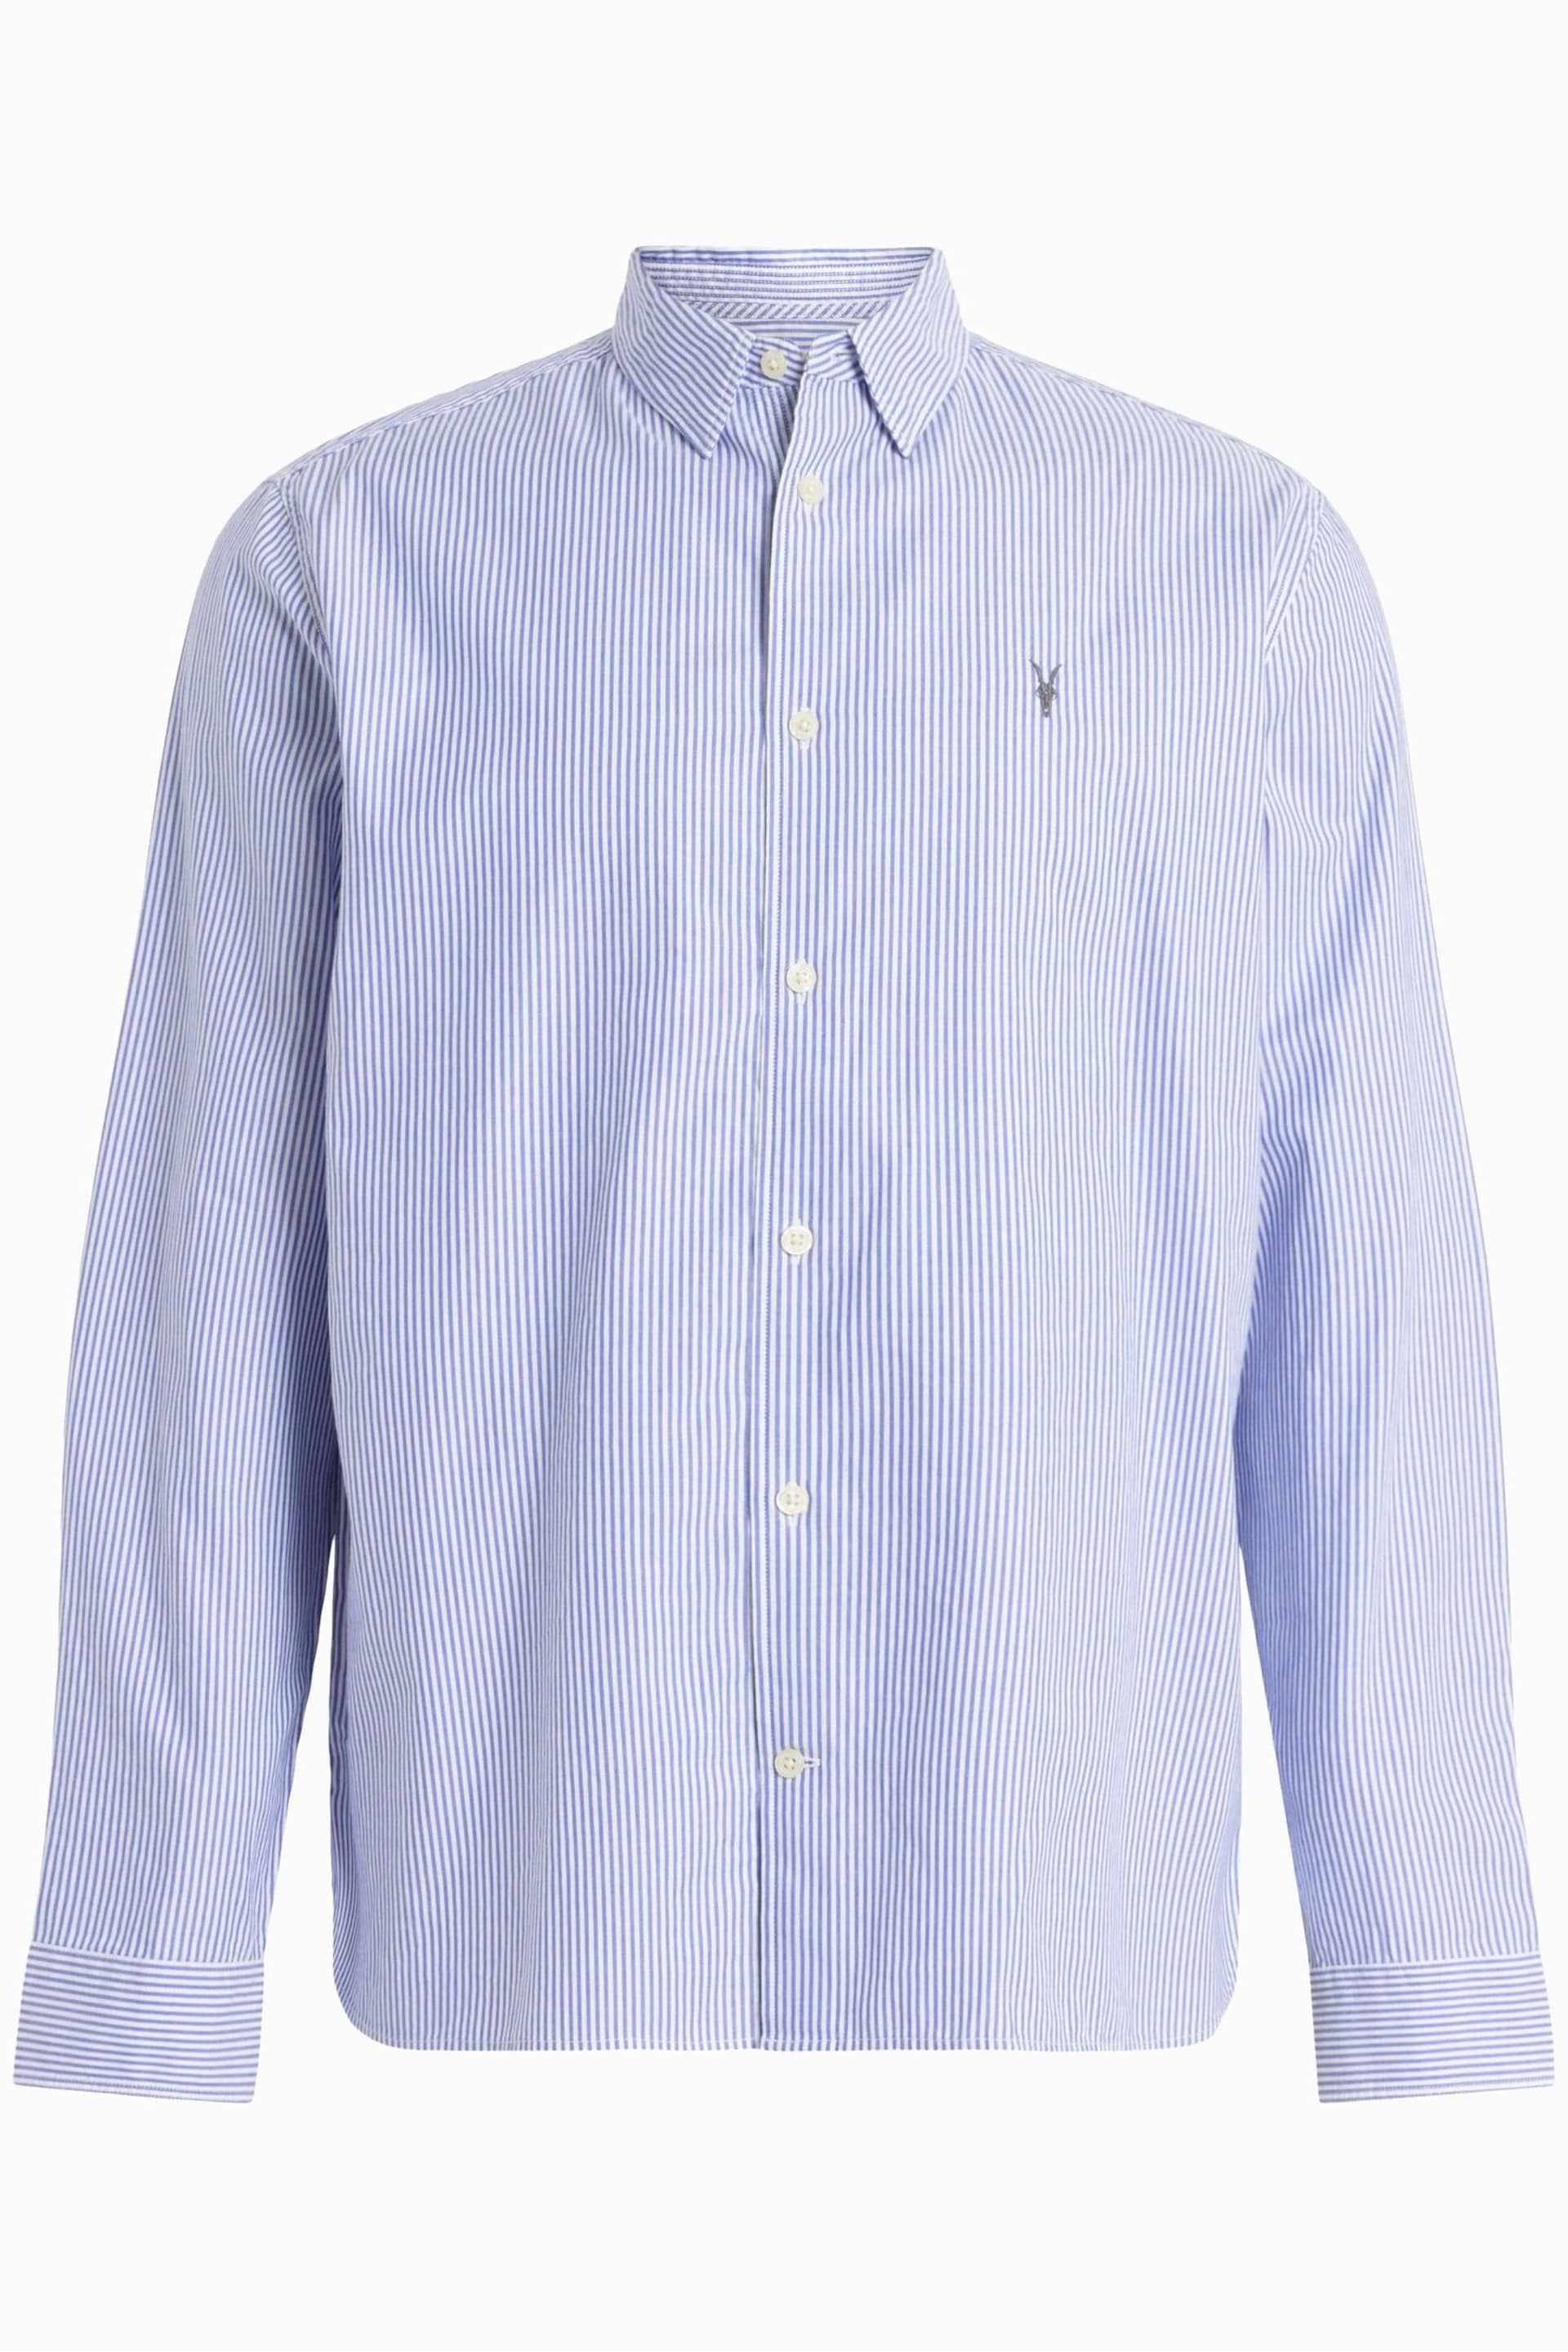 AllSaints White Hillview Long Sleeve Shirt - Image 6 of 6